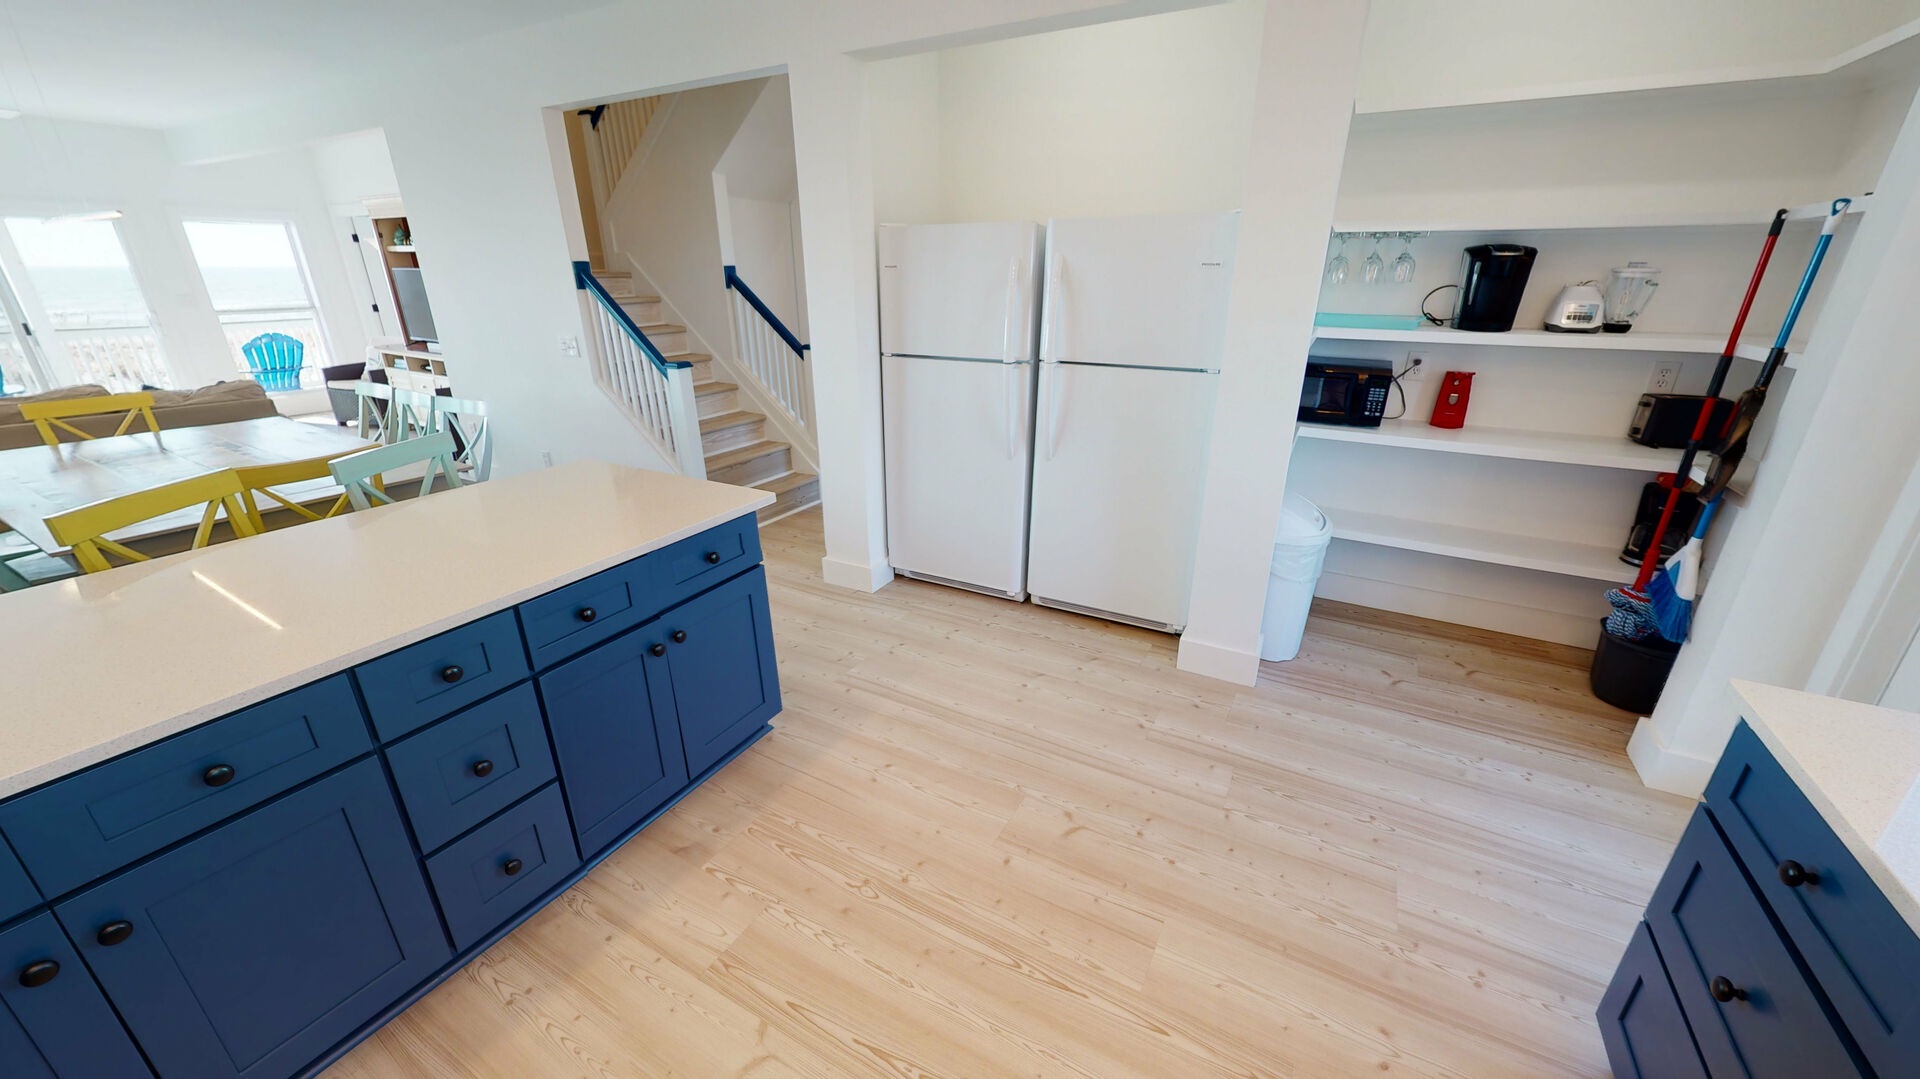 This updated kitchen features 2 refrigerators and a large pantry